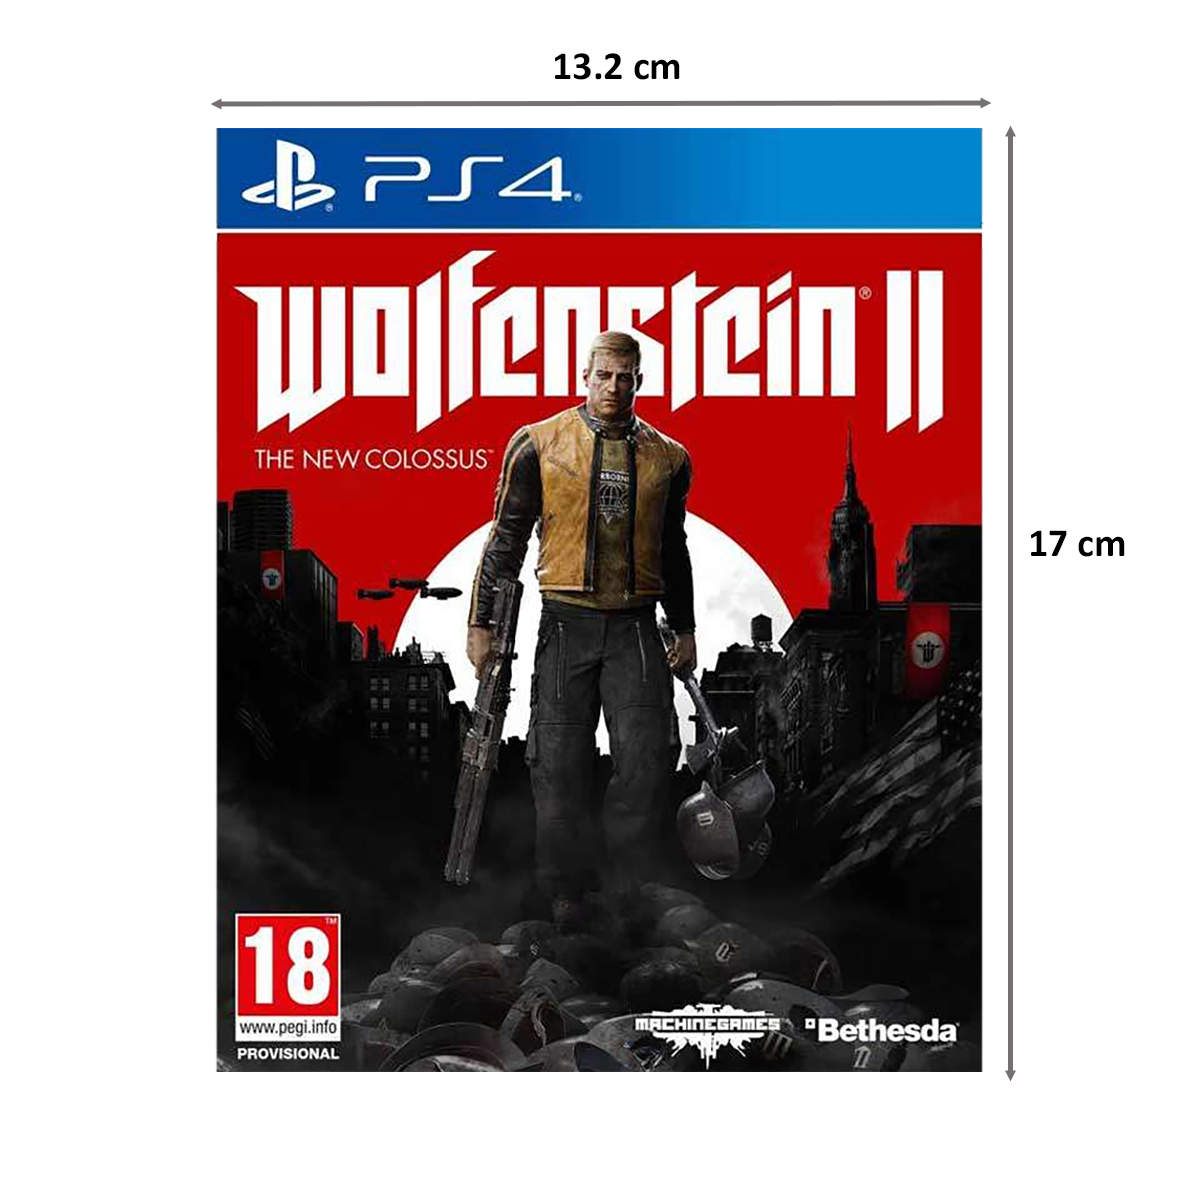 PS4 Game (Wolfenstein II: The New Colossus)_2